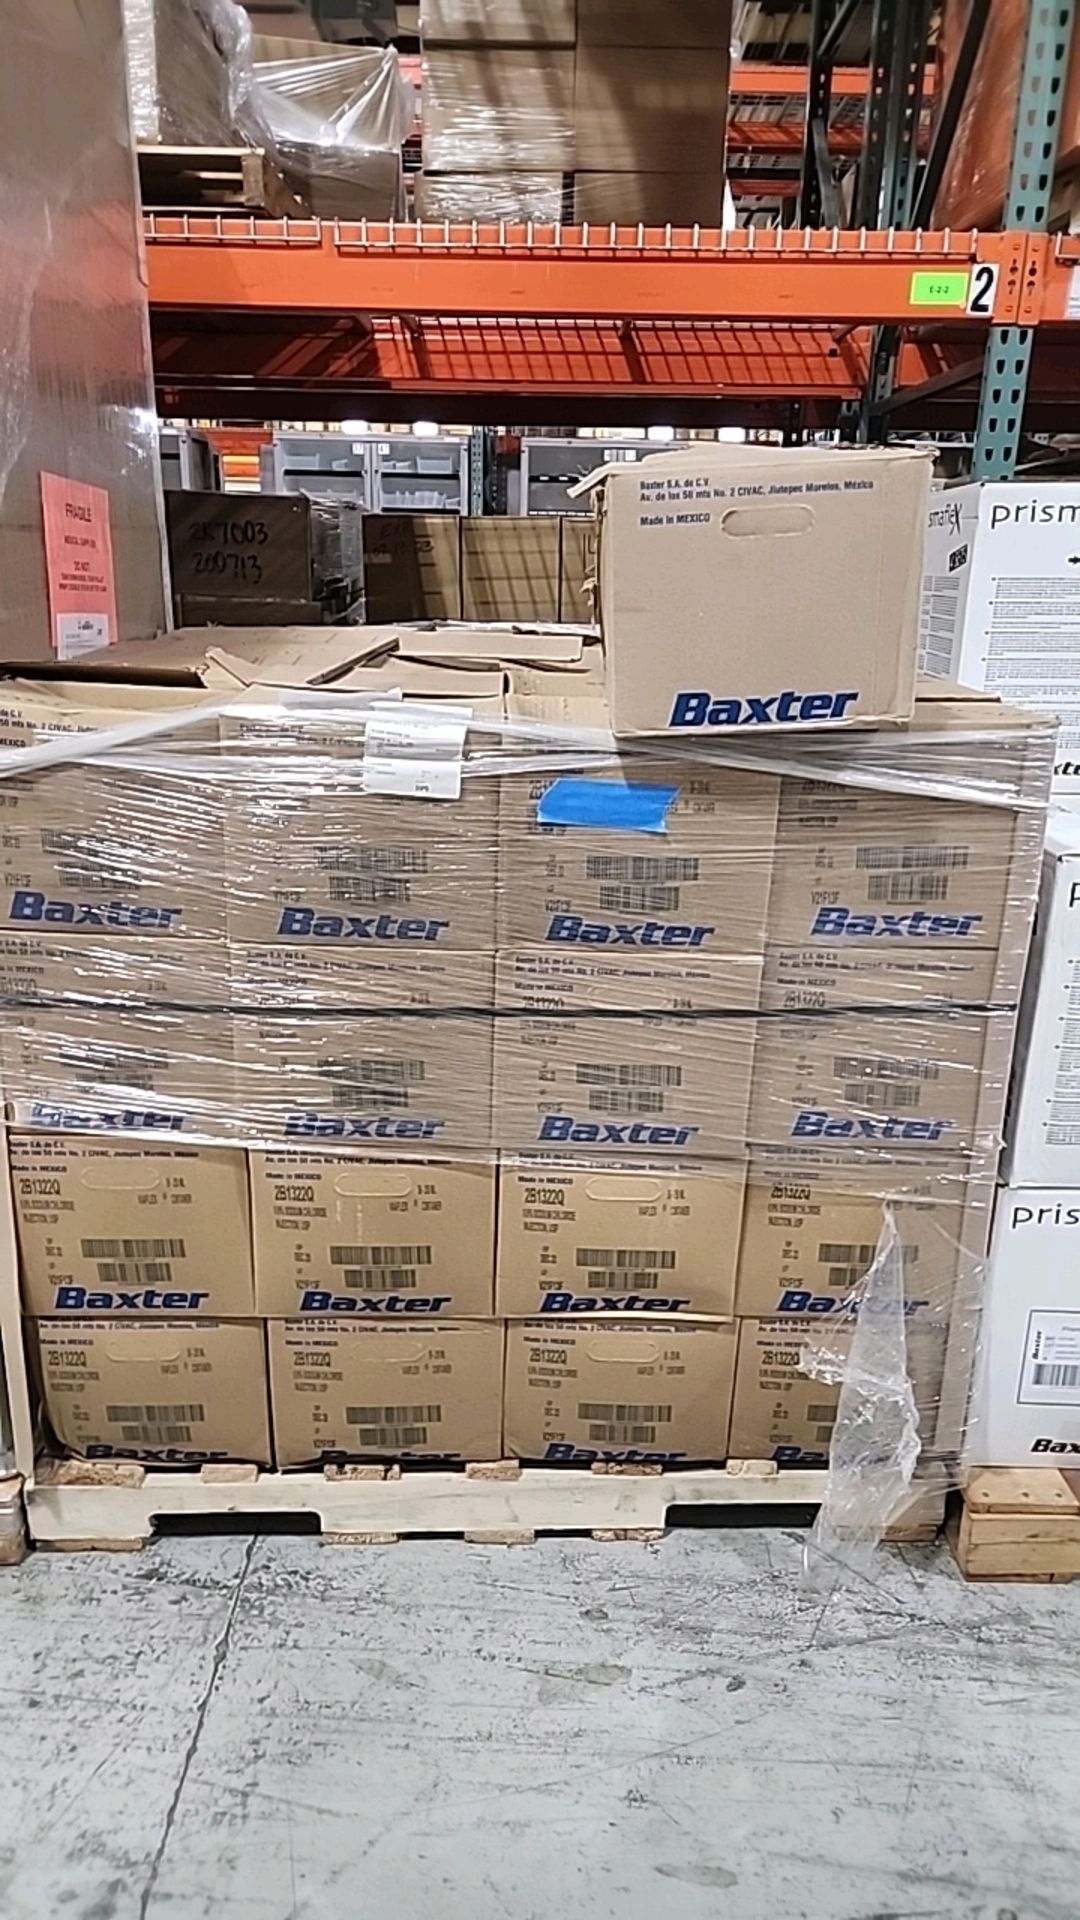 BAXTER 0.9% SODIUM CHLORIDE INJECTION, USP (NOT IN DATE) LOCATION: 100 GOLDEN DR. CODE: 154